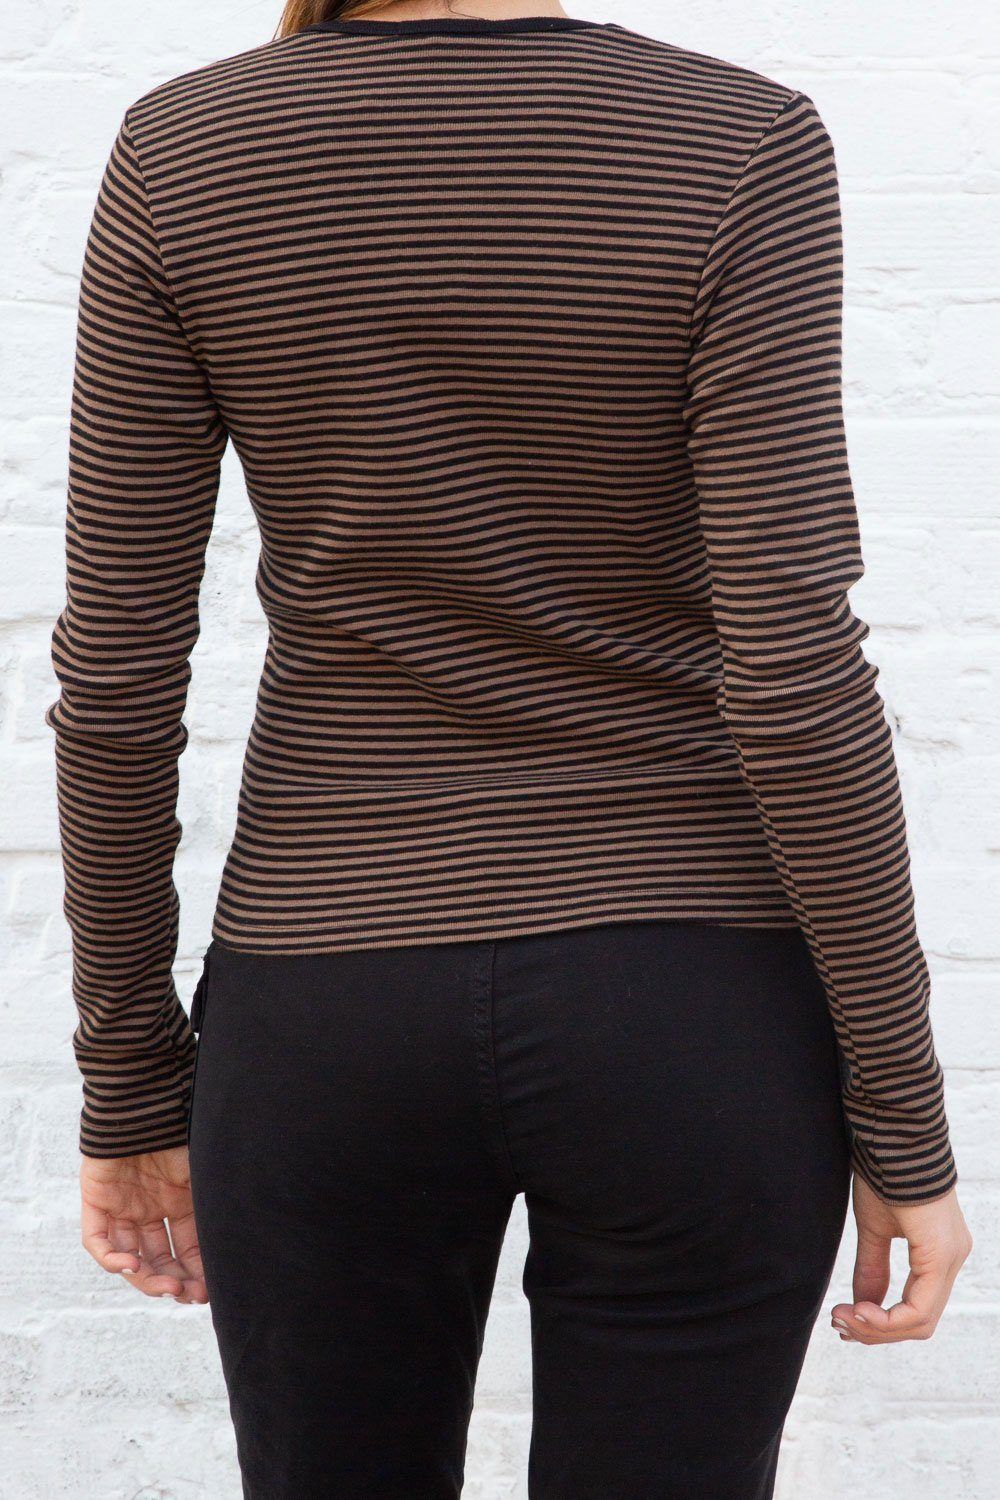 Brown With Black Stripes / S